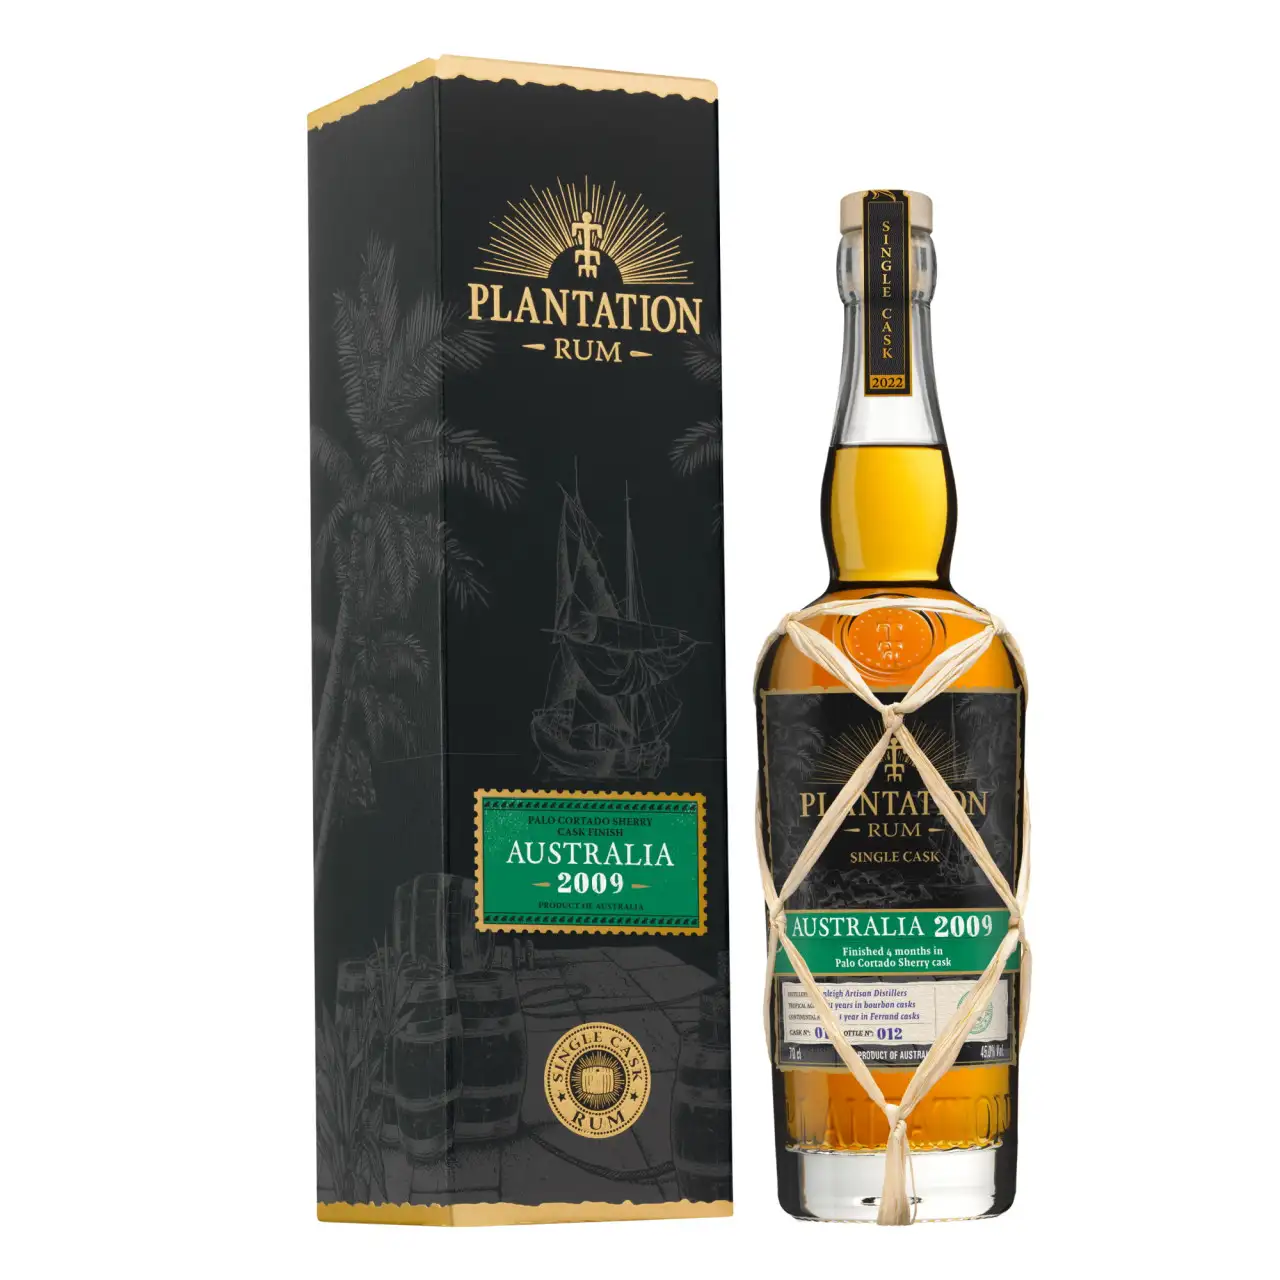 Image of the front of the bottle of the rum Plantation Palo Cortado Sherry Cask Finish